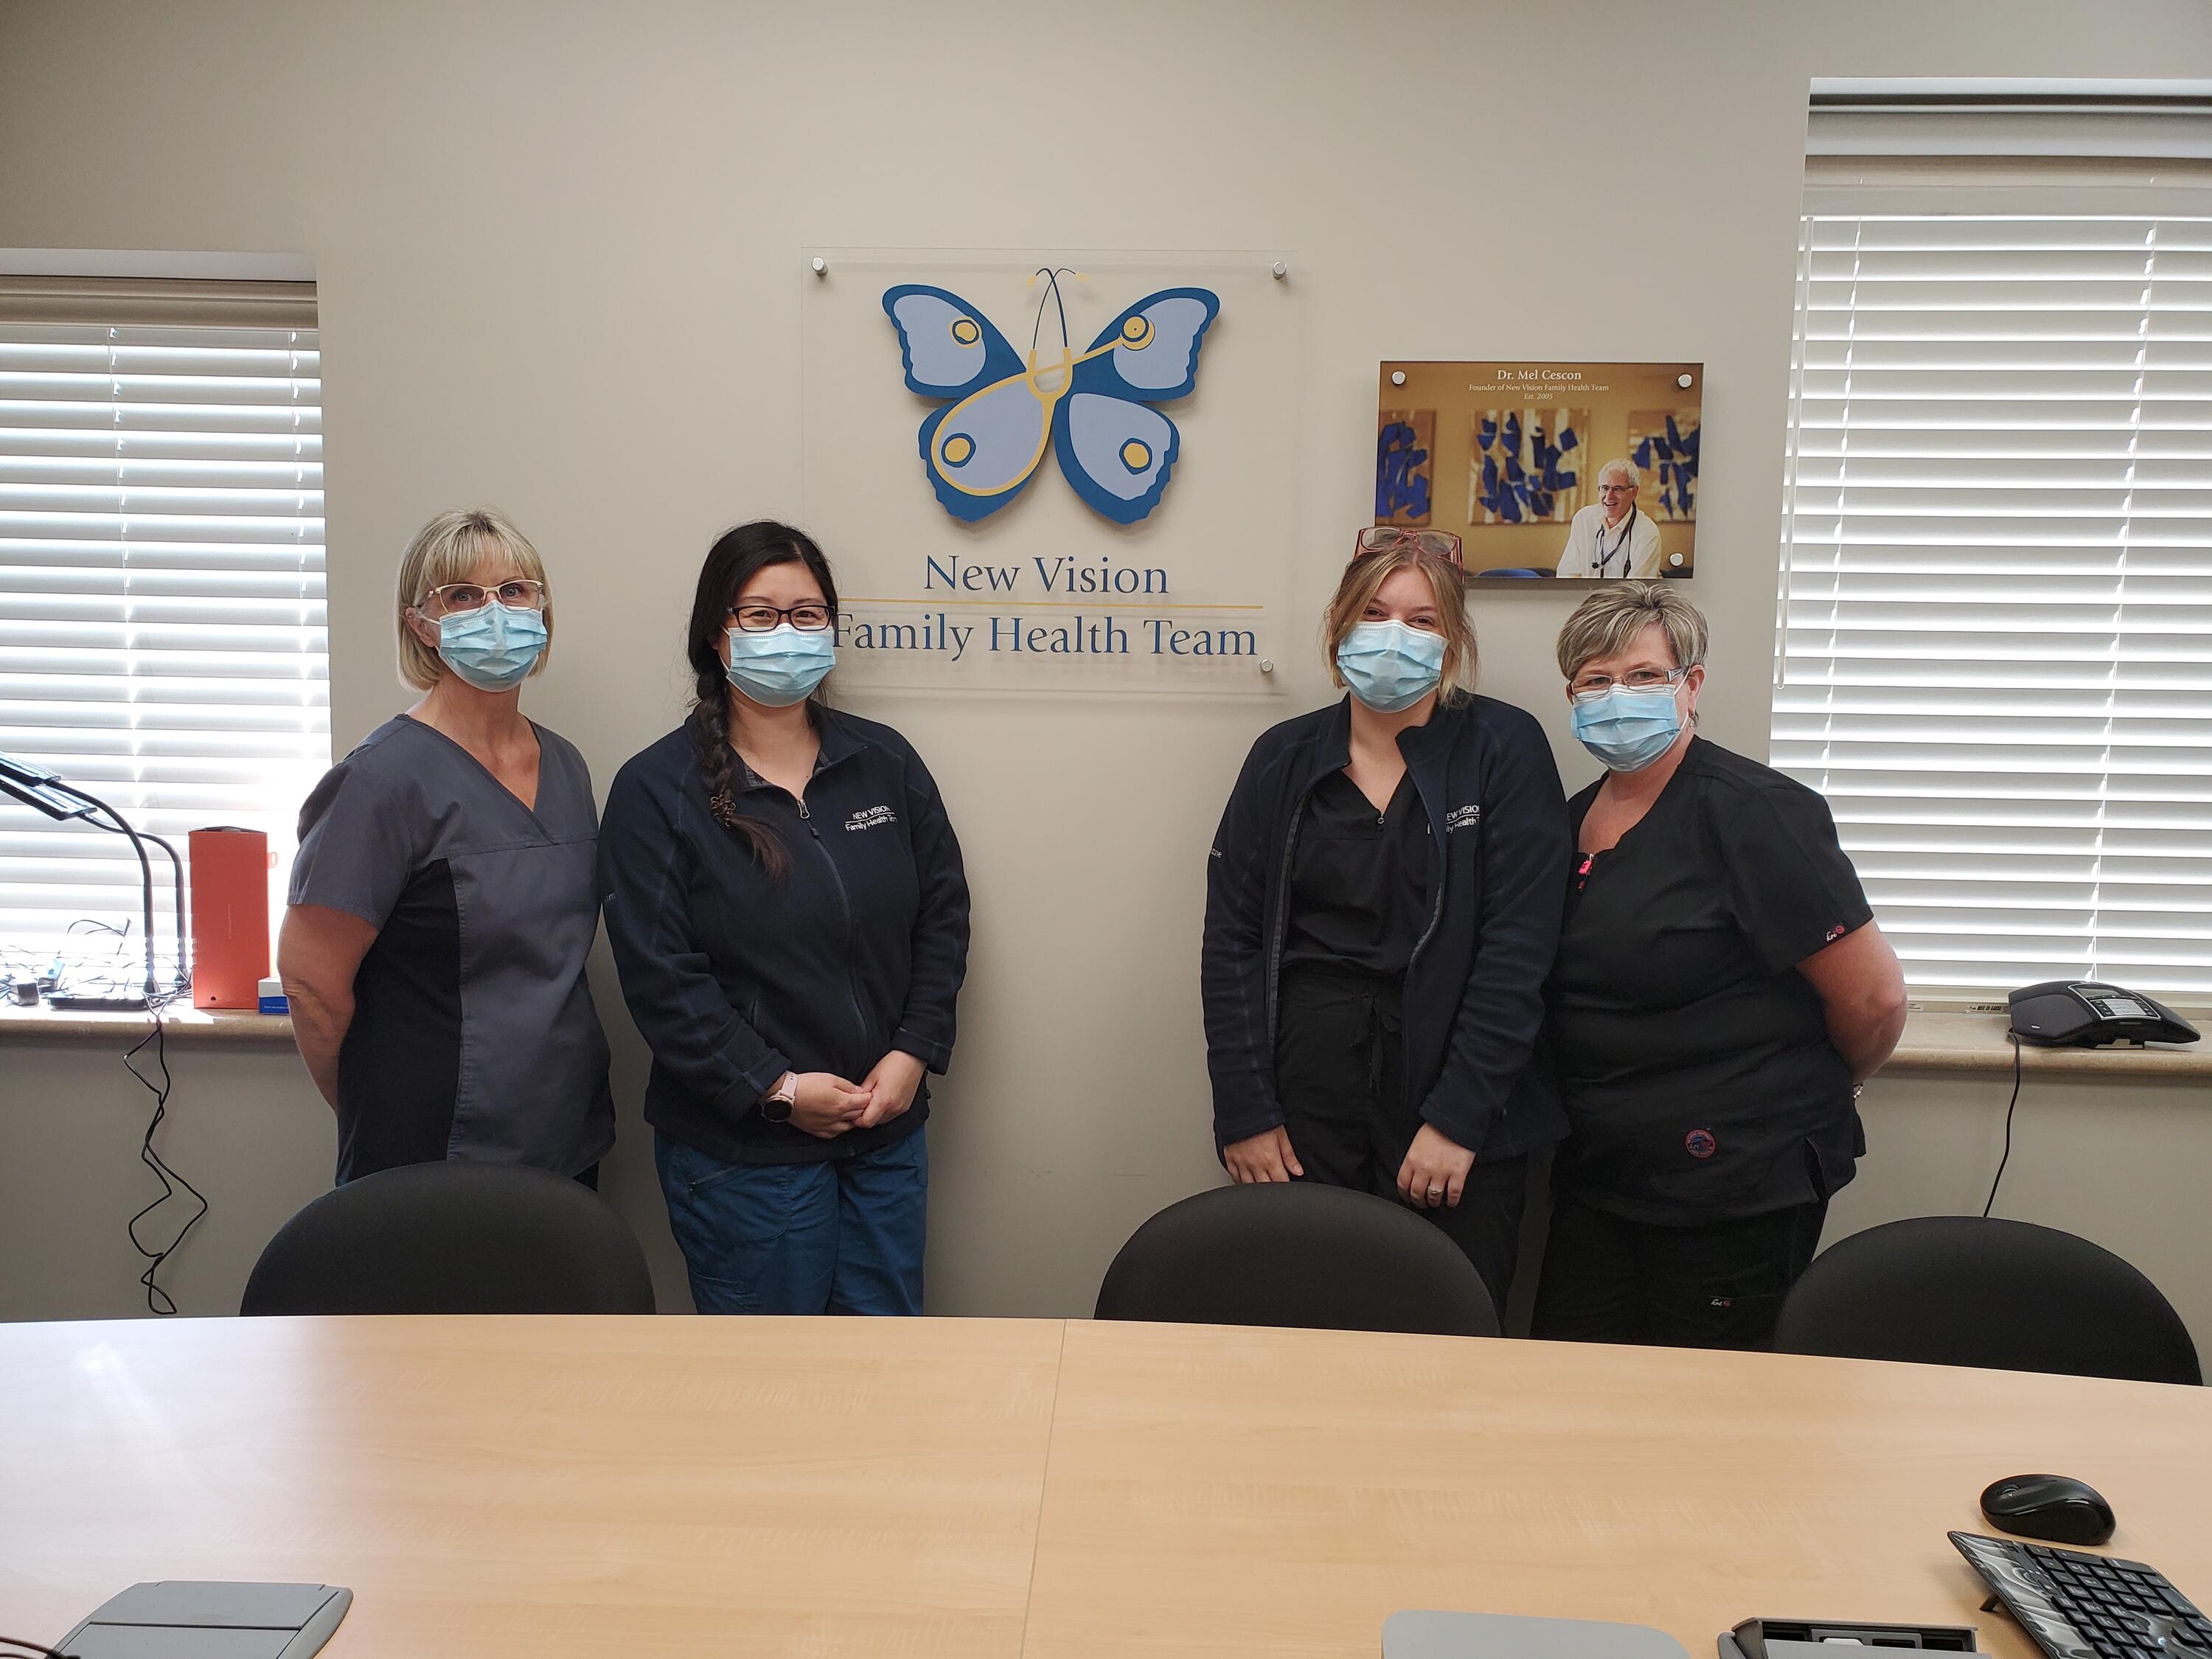 the team at New Vision Family Health Team wearing masks and standing in a conference room